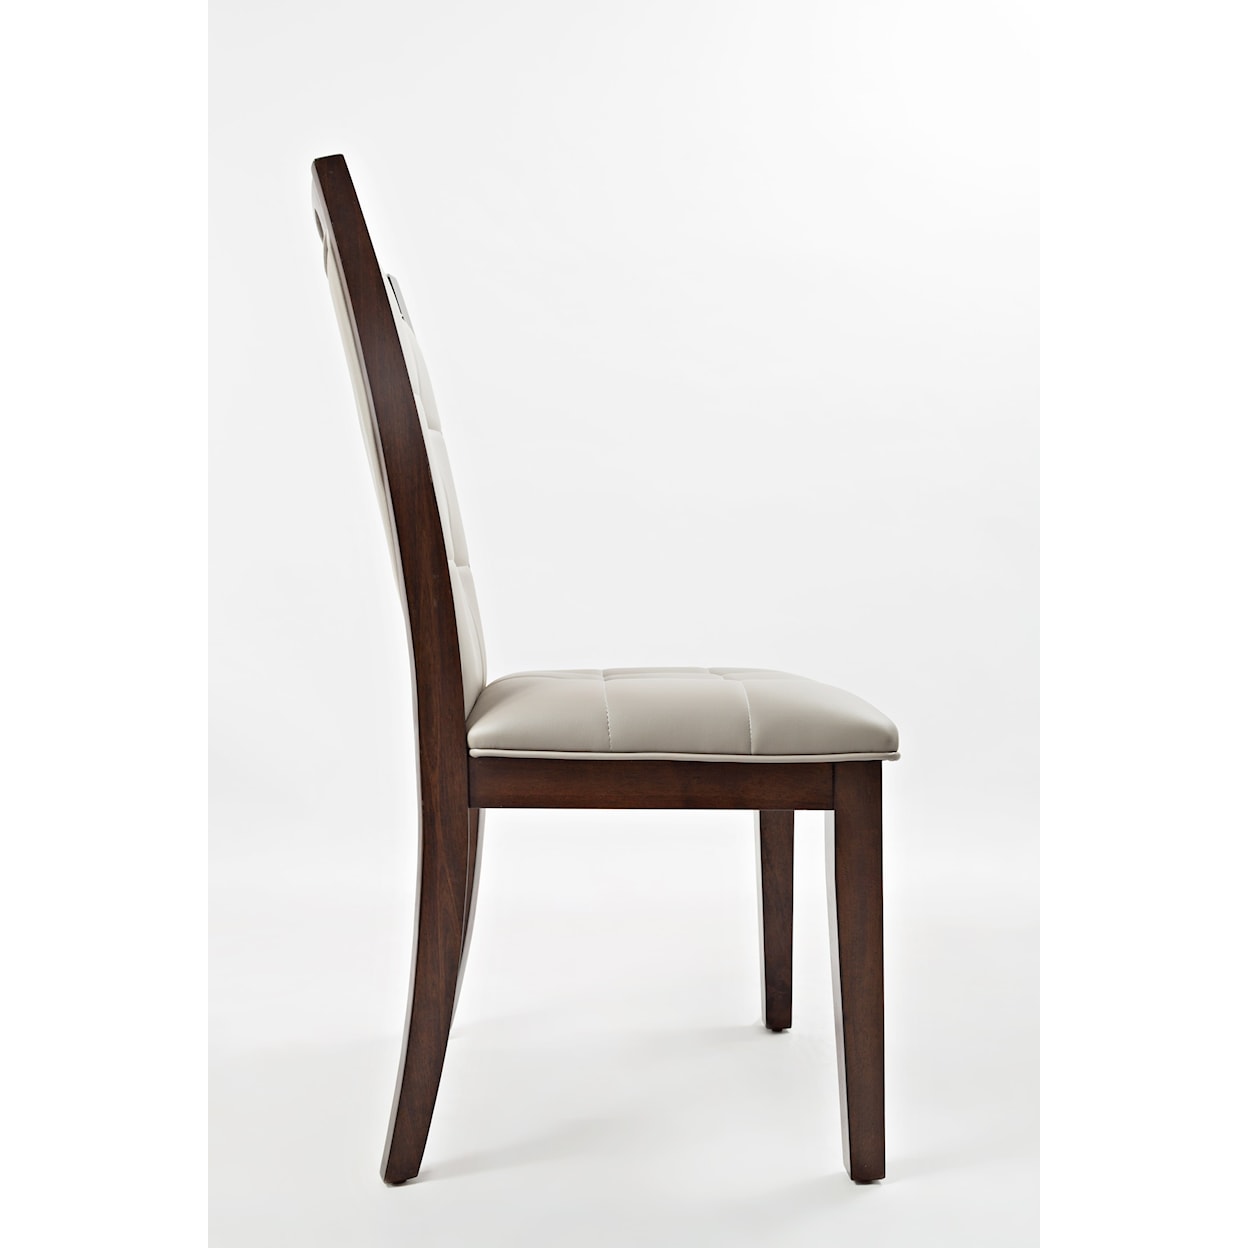 VFM Signature Manchester Upholstered Dining Chair